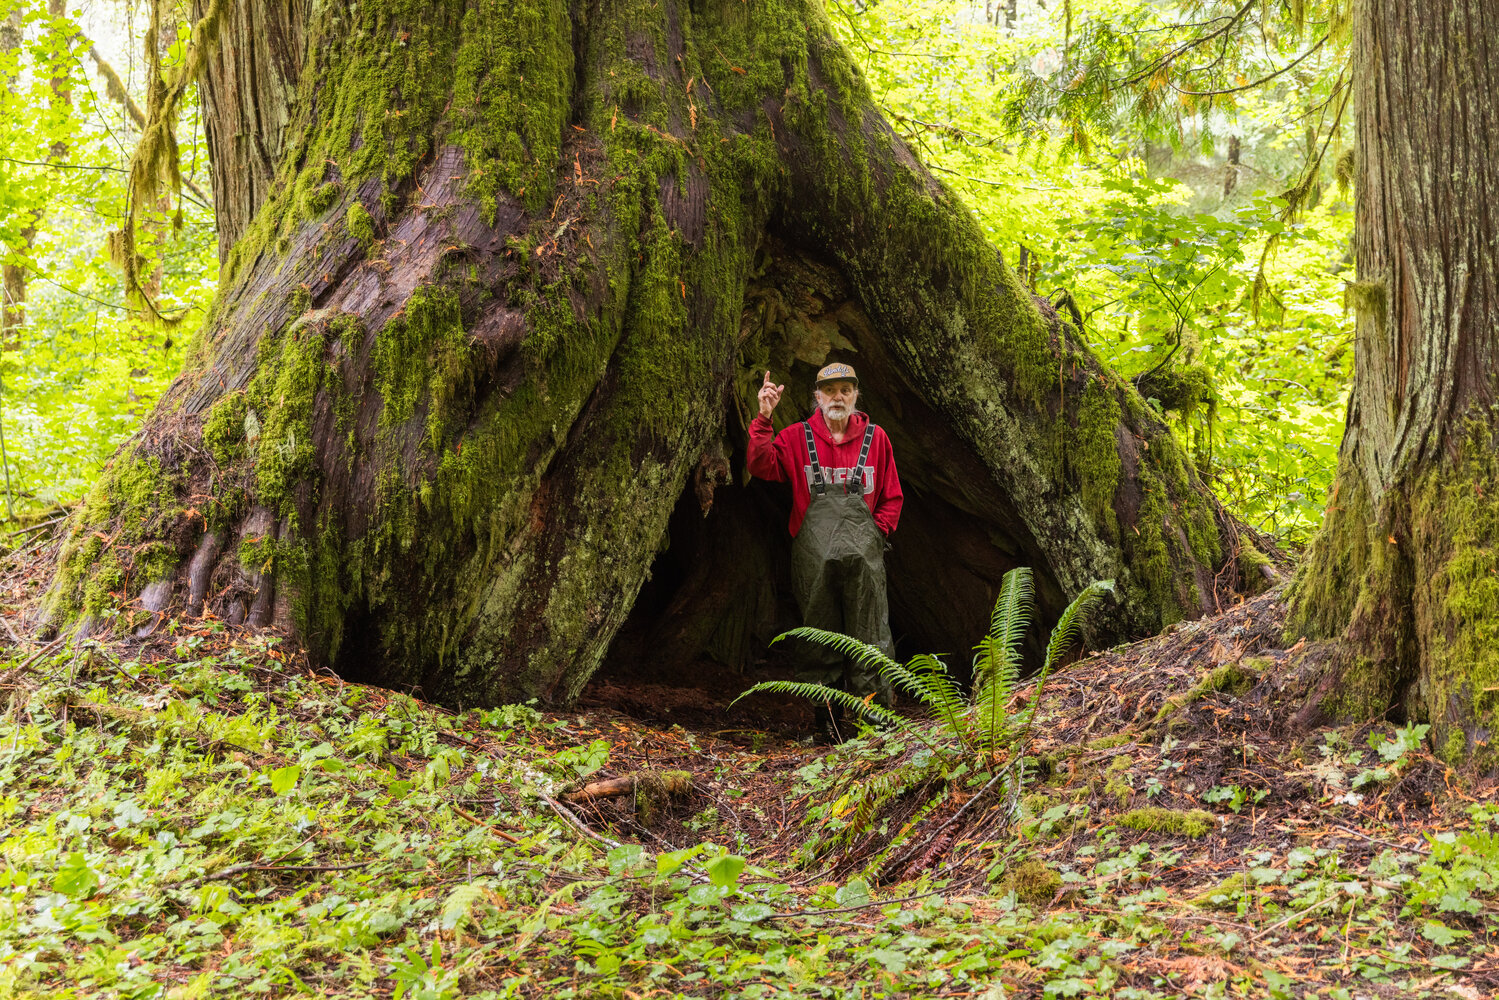 John Squires, a founding member of the Pinchot Partners, points upwards to a tree in the Grove of the Matriarchs on Thursday, Sept. 28, in the Gifford Pinchot National Forest.